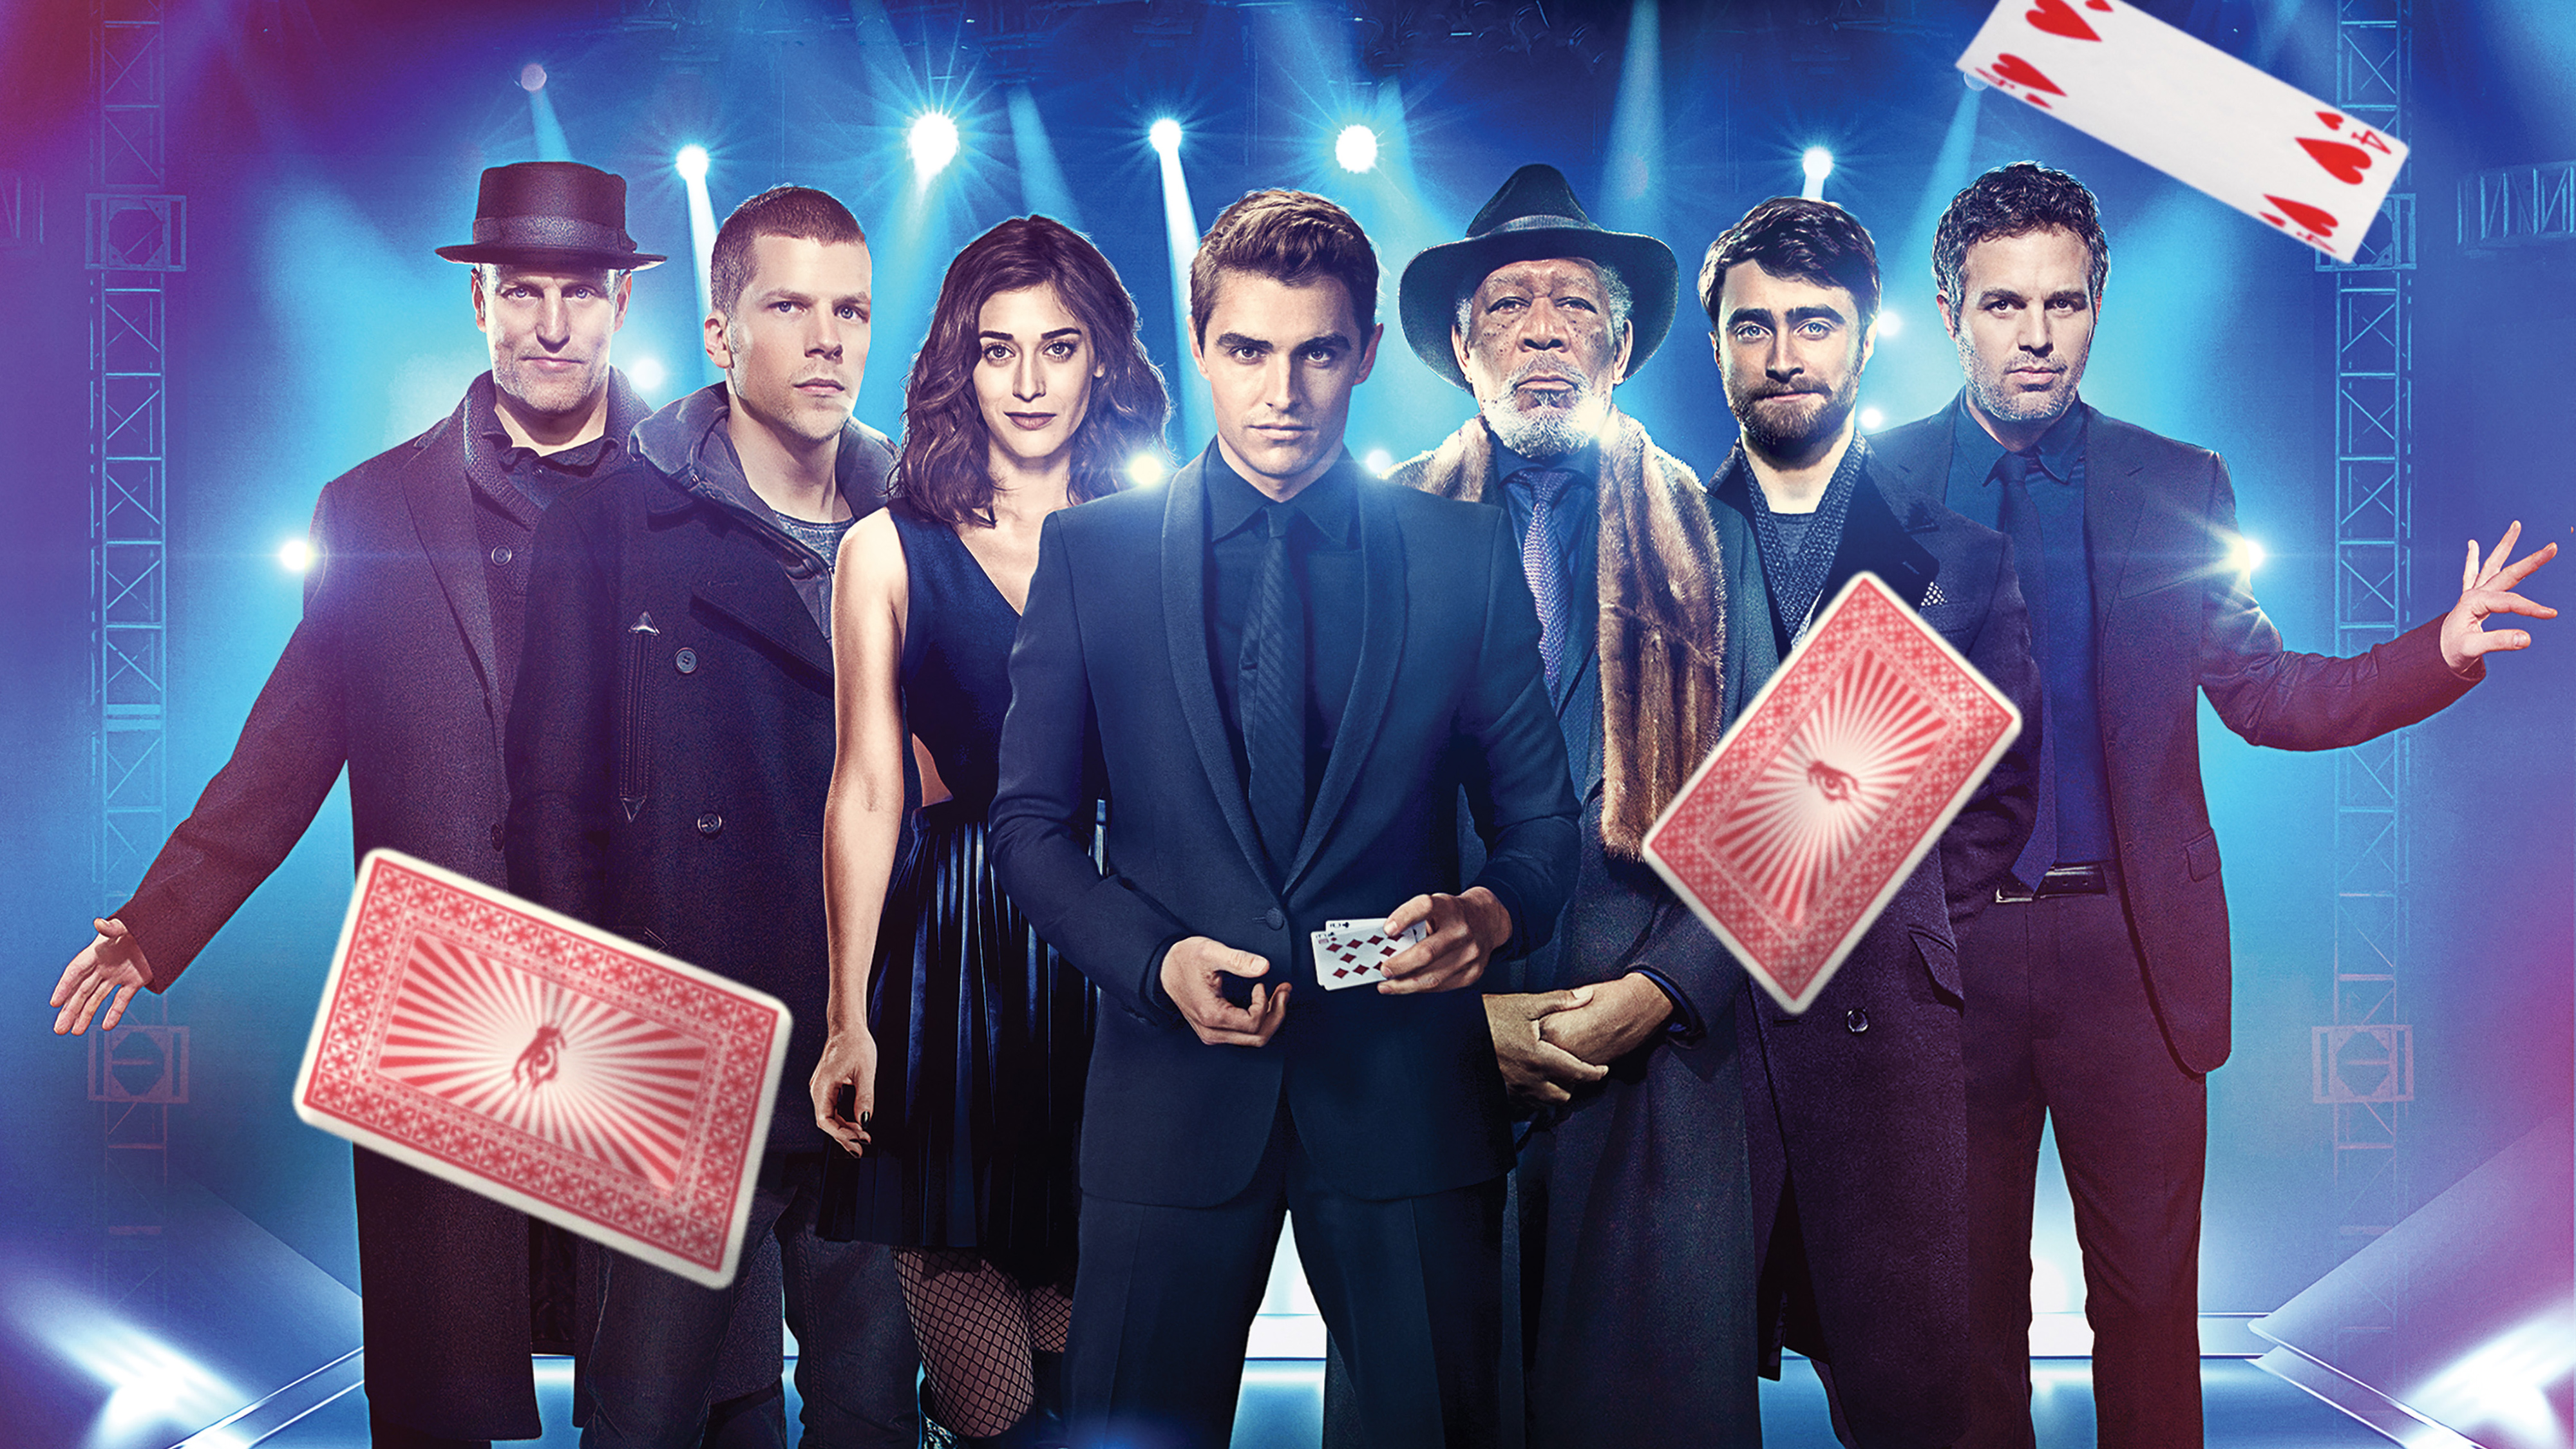 now you see me wallpaper,event,award ceremony